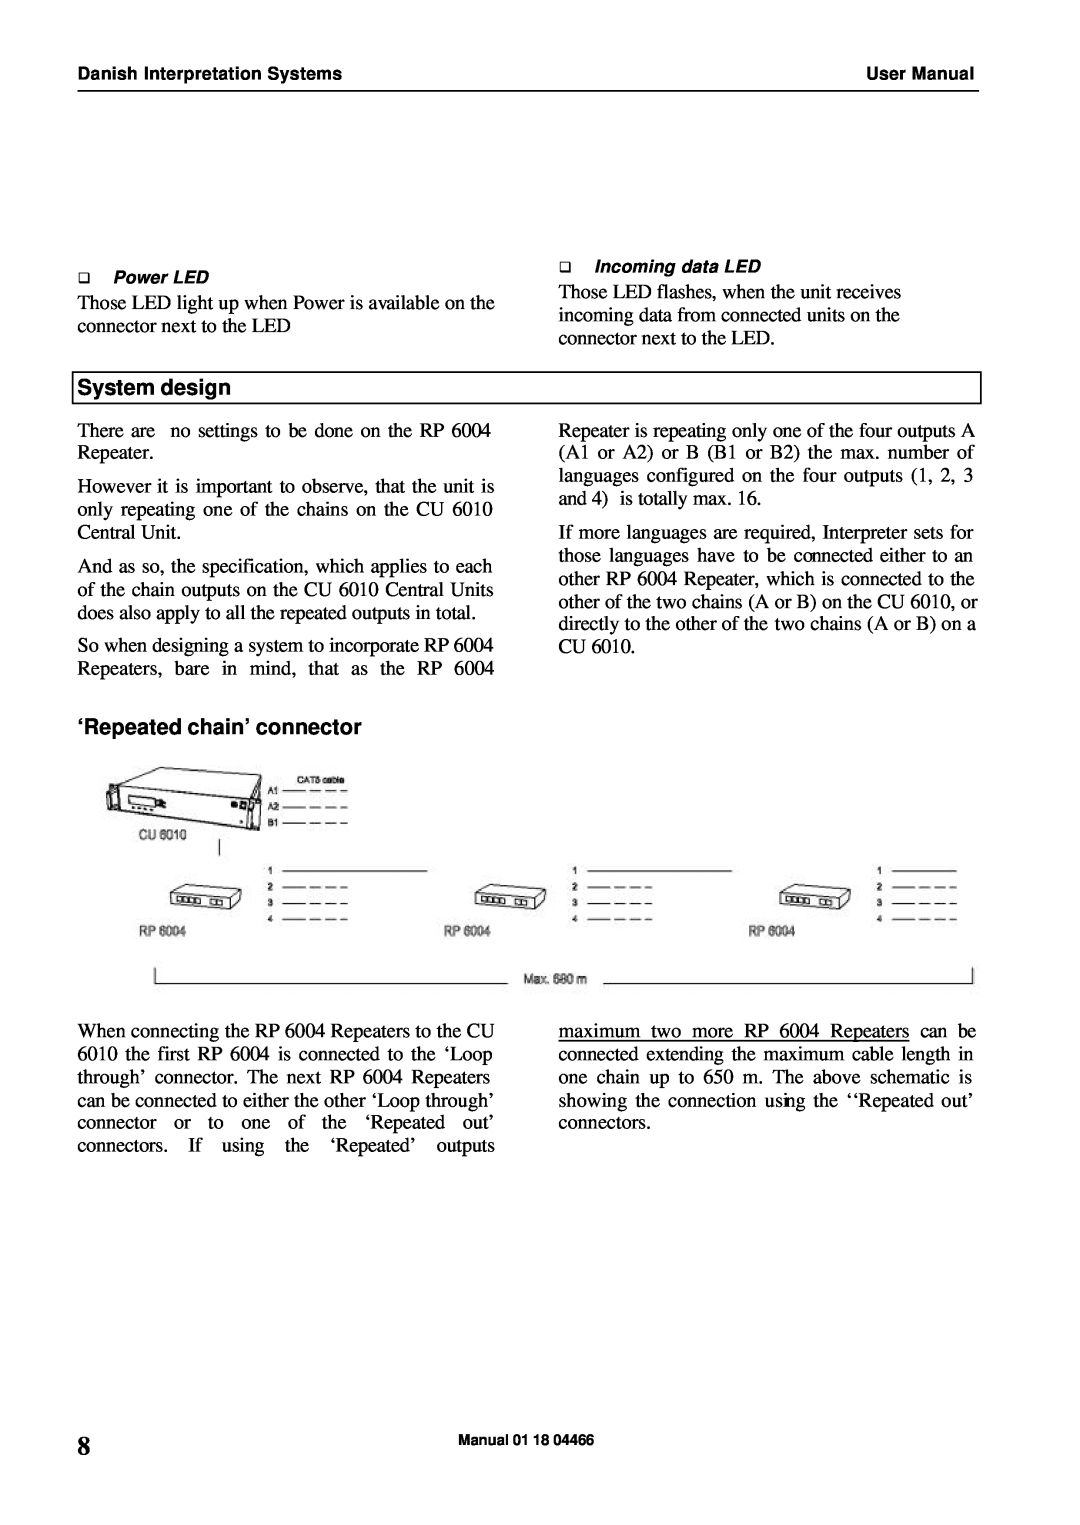 Listen Technologies RP 6004 user manual System design, ‘Repeated chain’ connector 